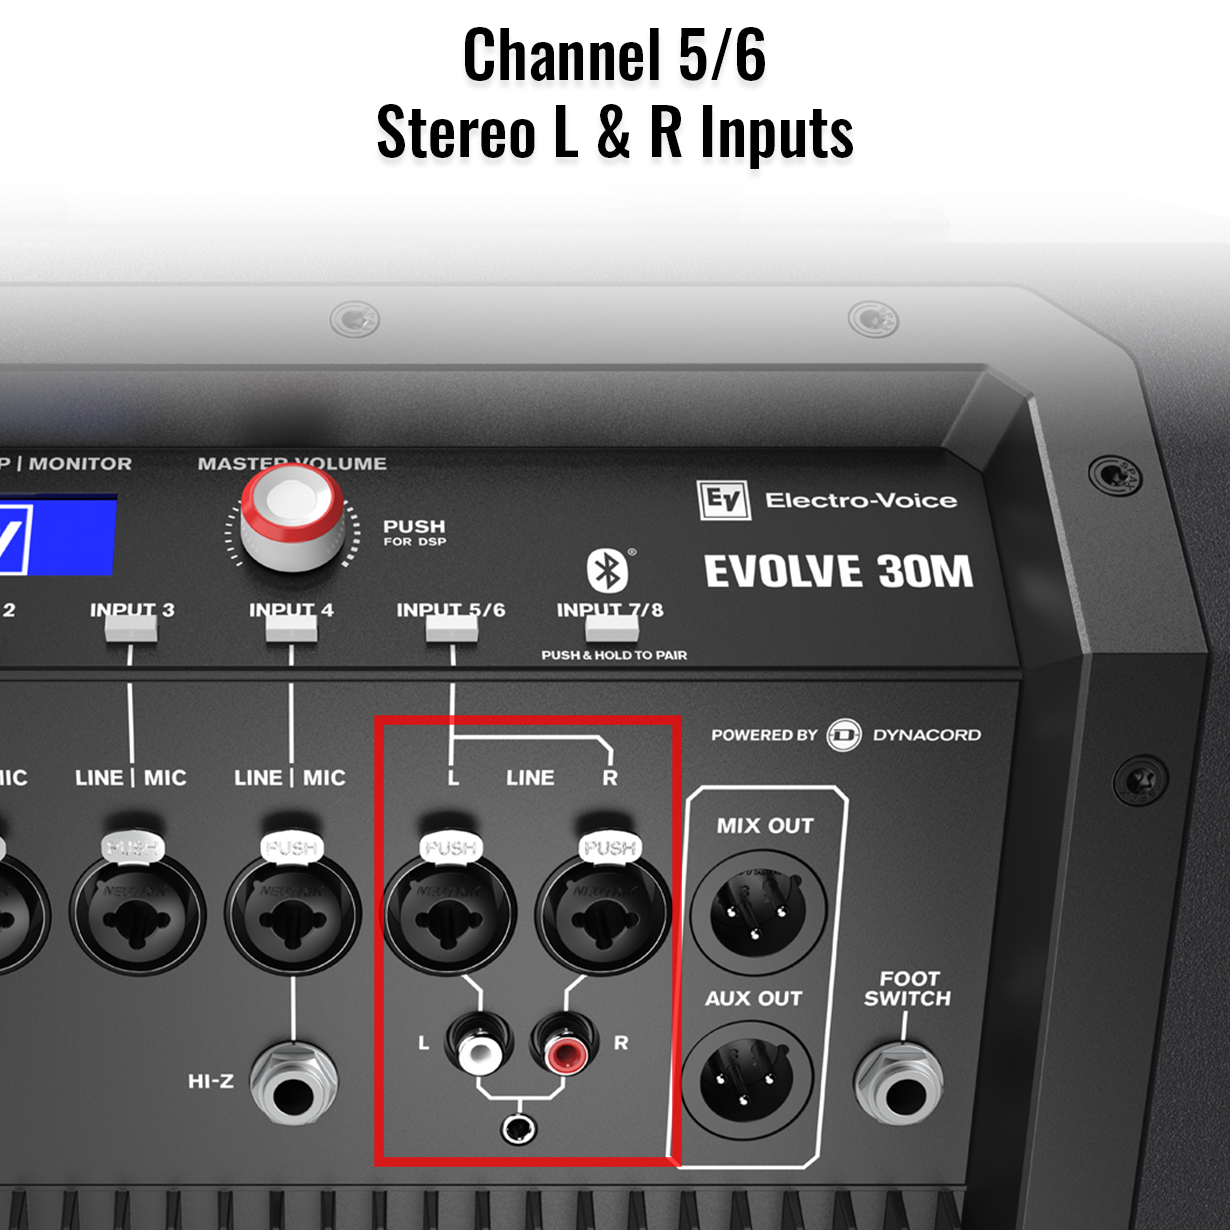 Electro-Voice Evolve 30M Mixer Channel 5/6 Stereo Inputs